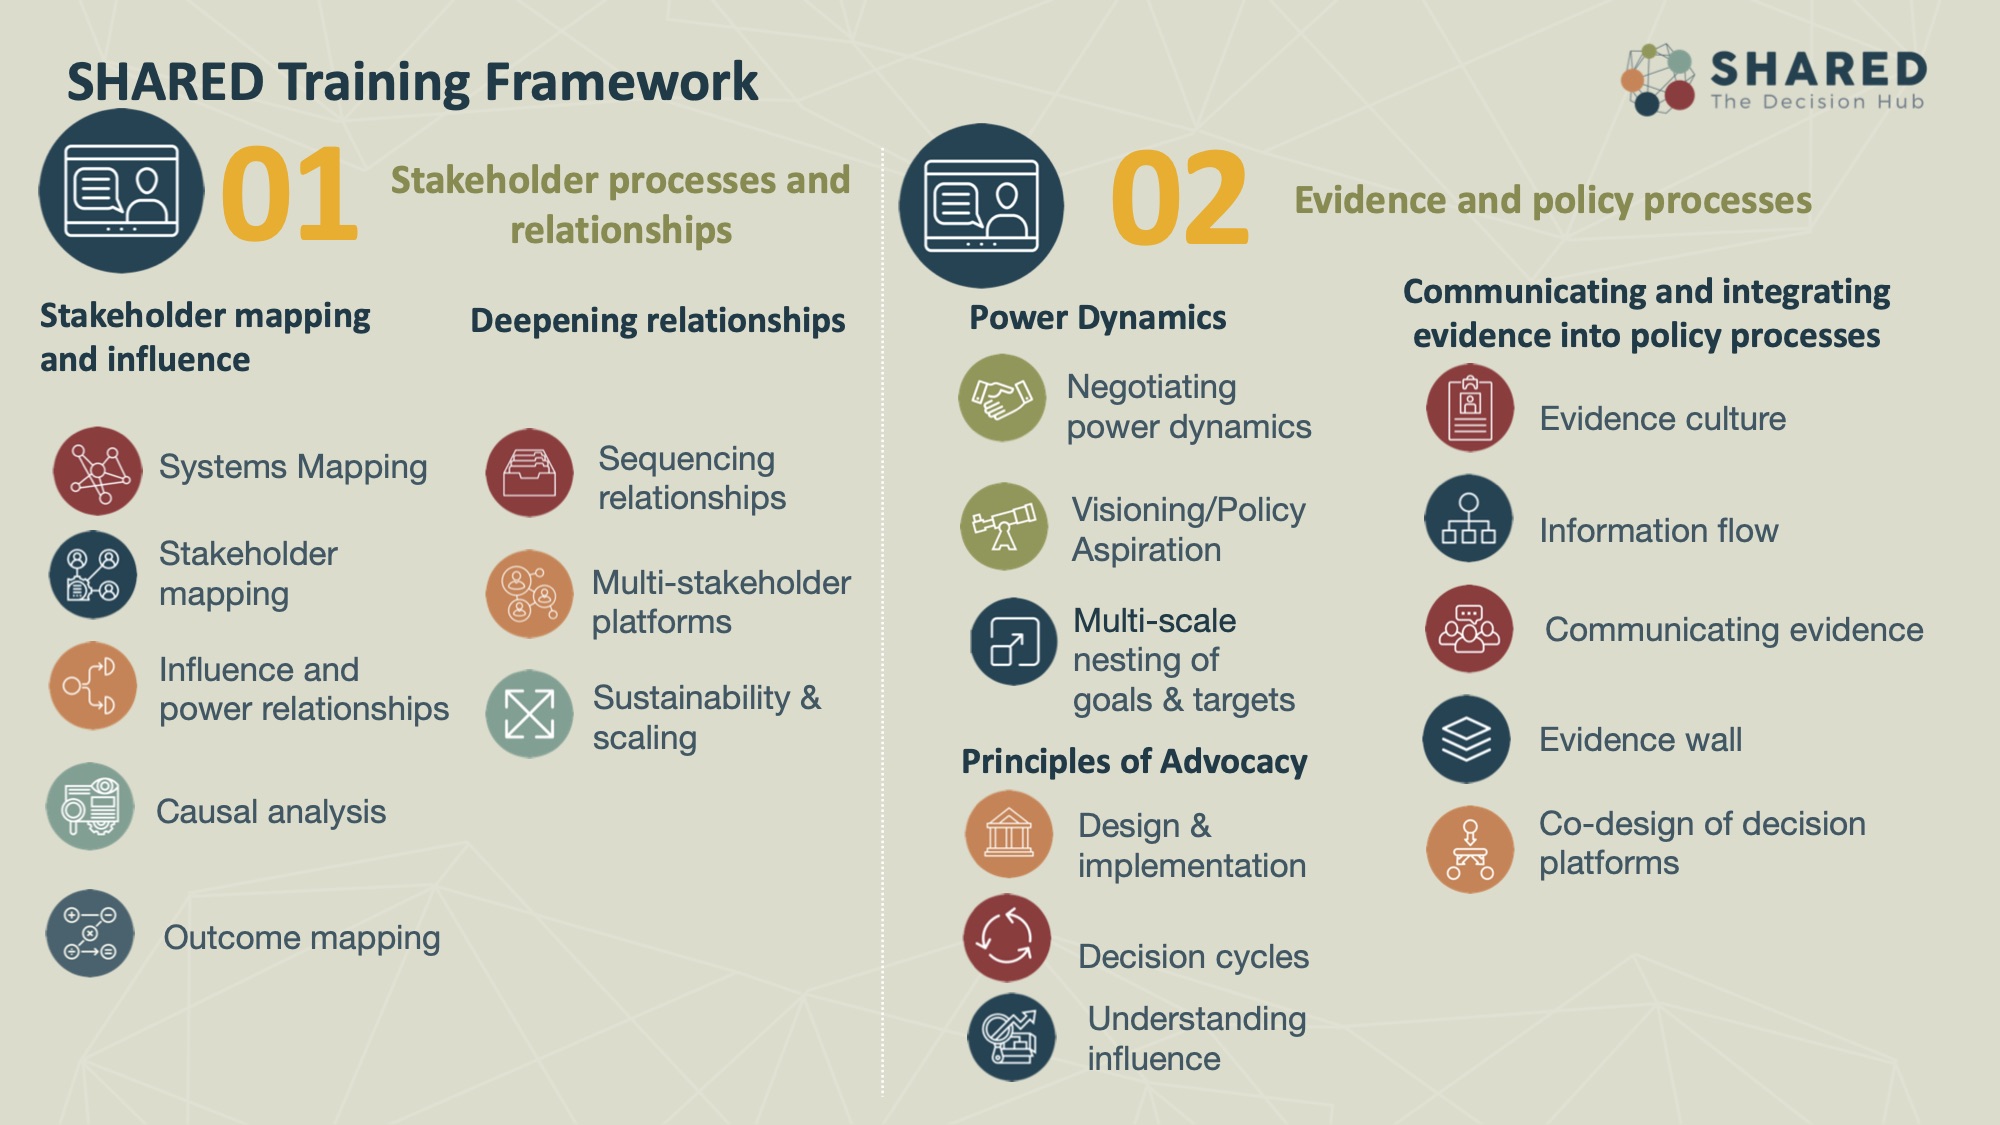 The training framework for Webinar 1 and Webinar 2 was developed to reflect the needs that were articulated during the consultation process with RFS country project teams.